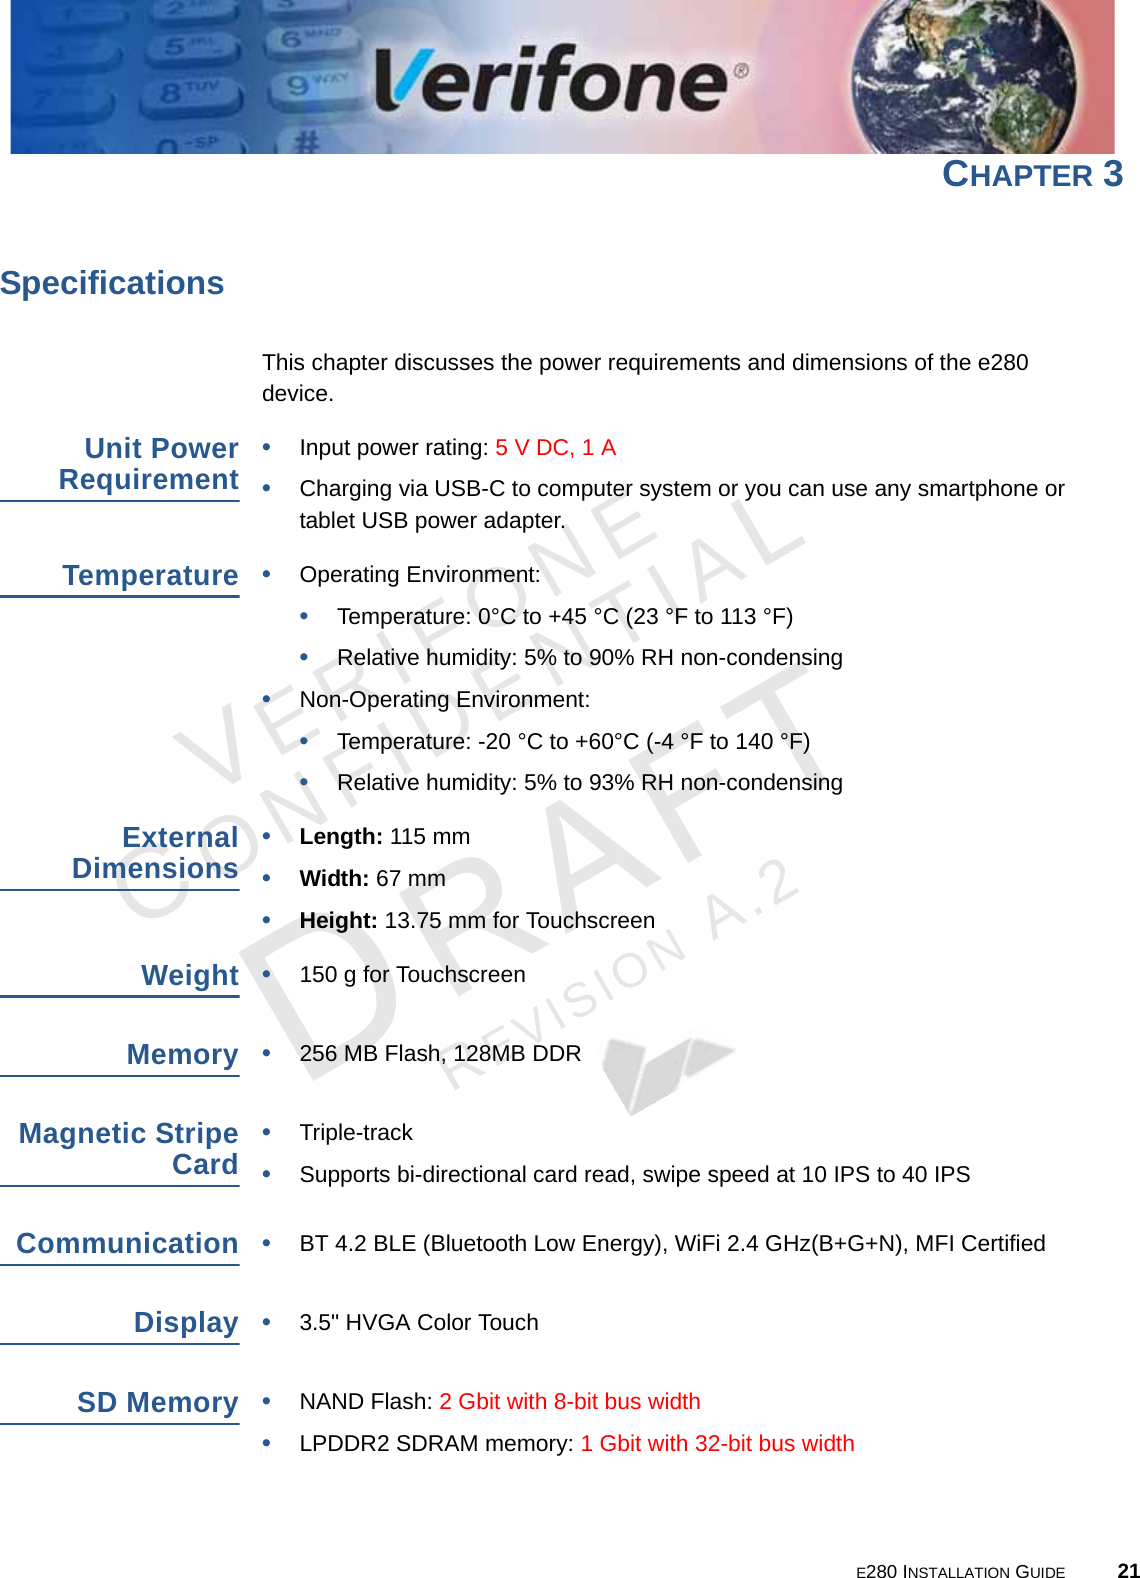 E280 INSTALLATION GUIDE 21VERIFONECONFIDENTIALREVISION A.2 CHAPTER 3SpecificationsThis chapter discusses the power requirements and dimensions of the e280 device.Unit Power Requirement•Input power rating: 5 V DC, 1 A•Charging via USB-C to computer system or you can use any smartphone or tablet USB power adapter.Temperature•Operating Environment:•Temperature: 0°C to +45 °C (23 °F to 113 °F)•Relative humidity: 5% to 90% RH non-condensing•Non-Operating Environment: •Temperature: -20 °C to +60°C (-4 °F to 140 °F)•Relative humidity: 5% to 93% RH non-condensingExternal Dimensions•Length: 115 mm•Width: 67 mm •Height: 13.75 mm for TouchscreenWeight•150 g for TouchscreenMemory•256 MB Flash, 128MB DDRMagnetic Stripe Card•Triple-track•Supports bi-directional card read, swipe speed at 10 IPS to 40 IPSCommunication•BT 4.2 BLE (Bluetooth Low Energy), WiFi 2.4 GHz(B+G+N), MFI CertifiedDisplay•3.5&quot; HVGA Color Touch SD Memory •NAND Flash: 2 Gbit with 8-bit bus width•LPDDR2 SDRAM memory: 1 Gbit with 32-bit bus width